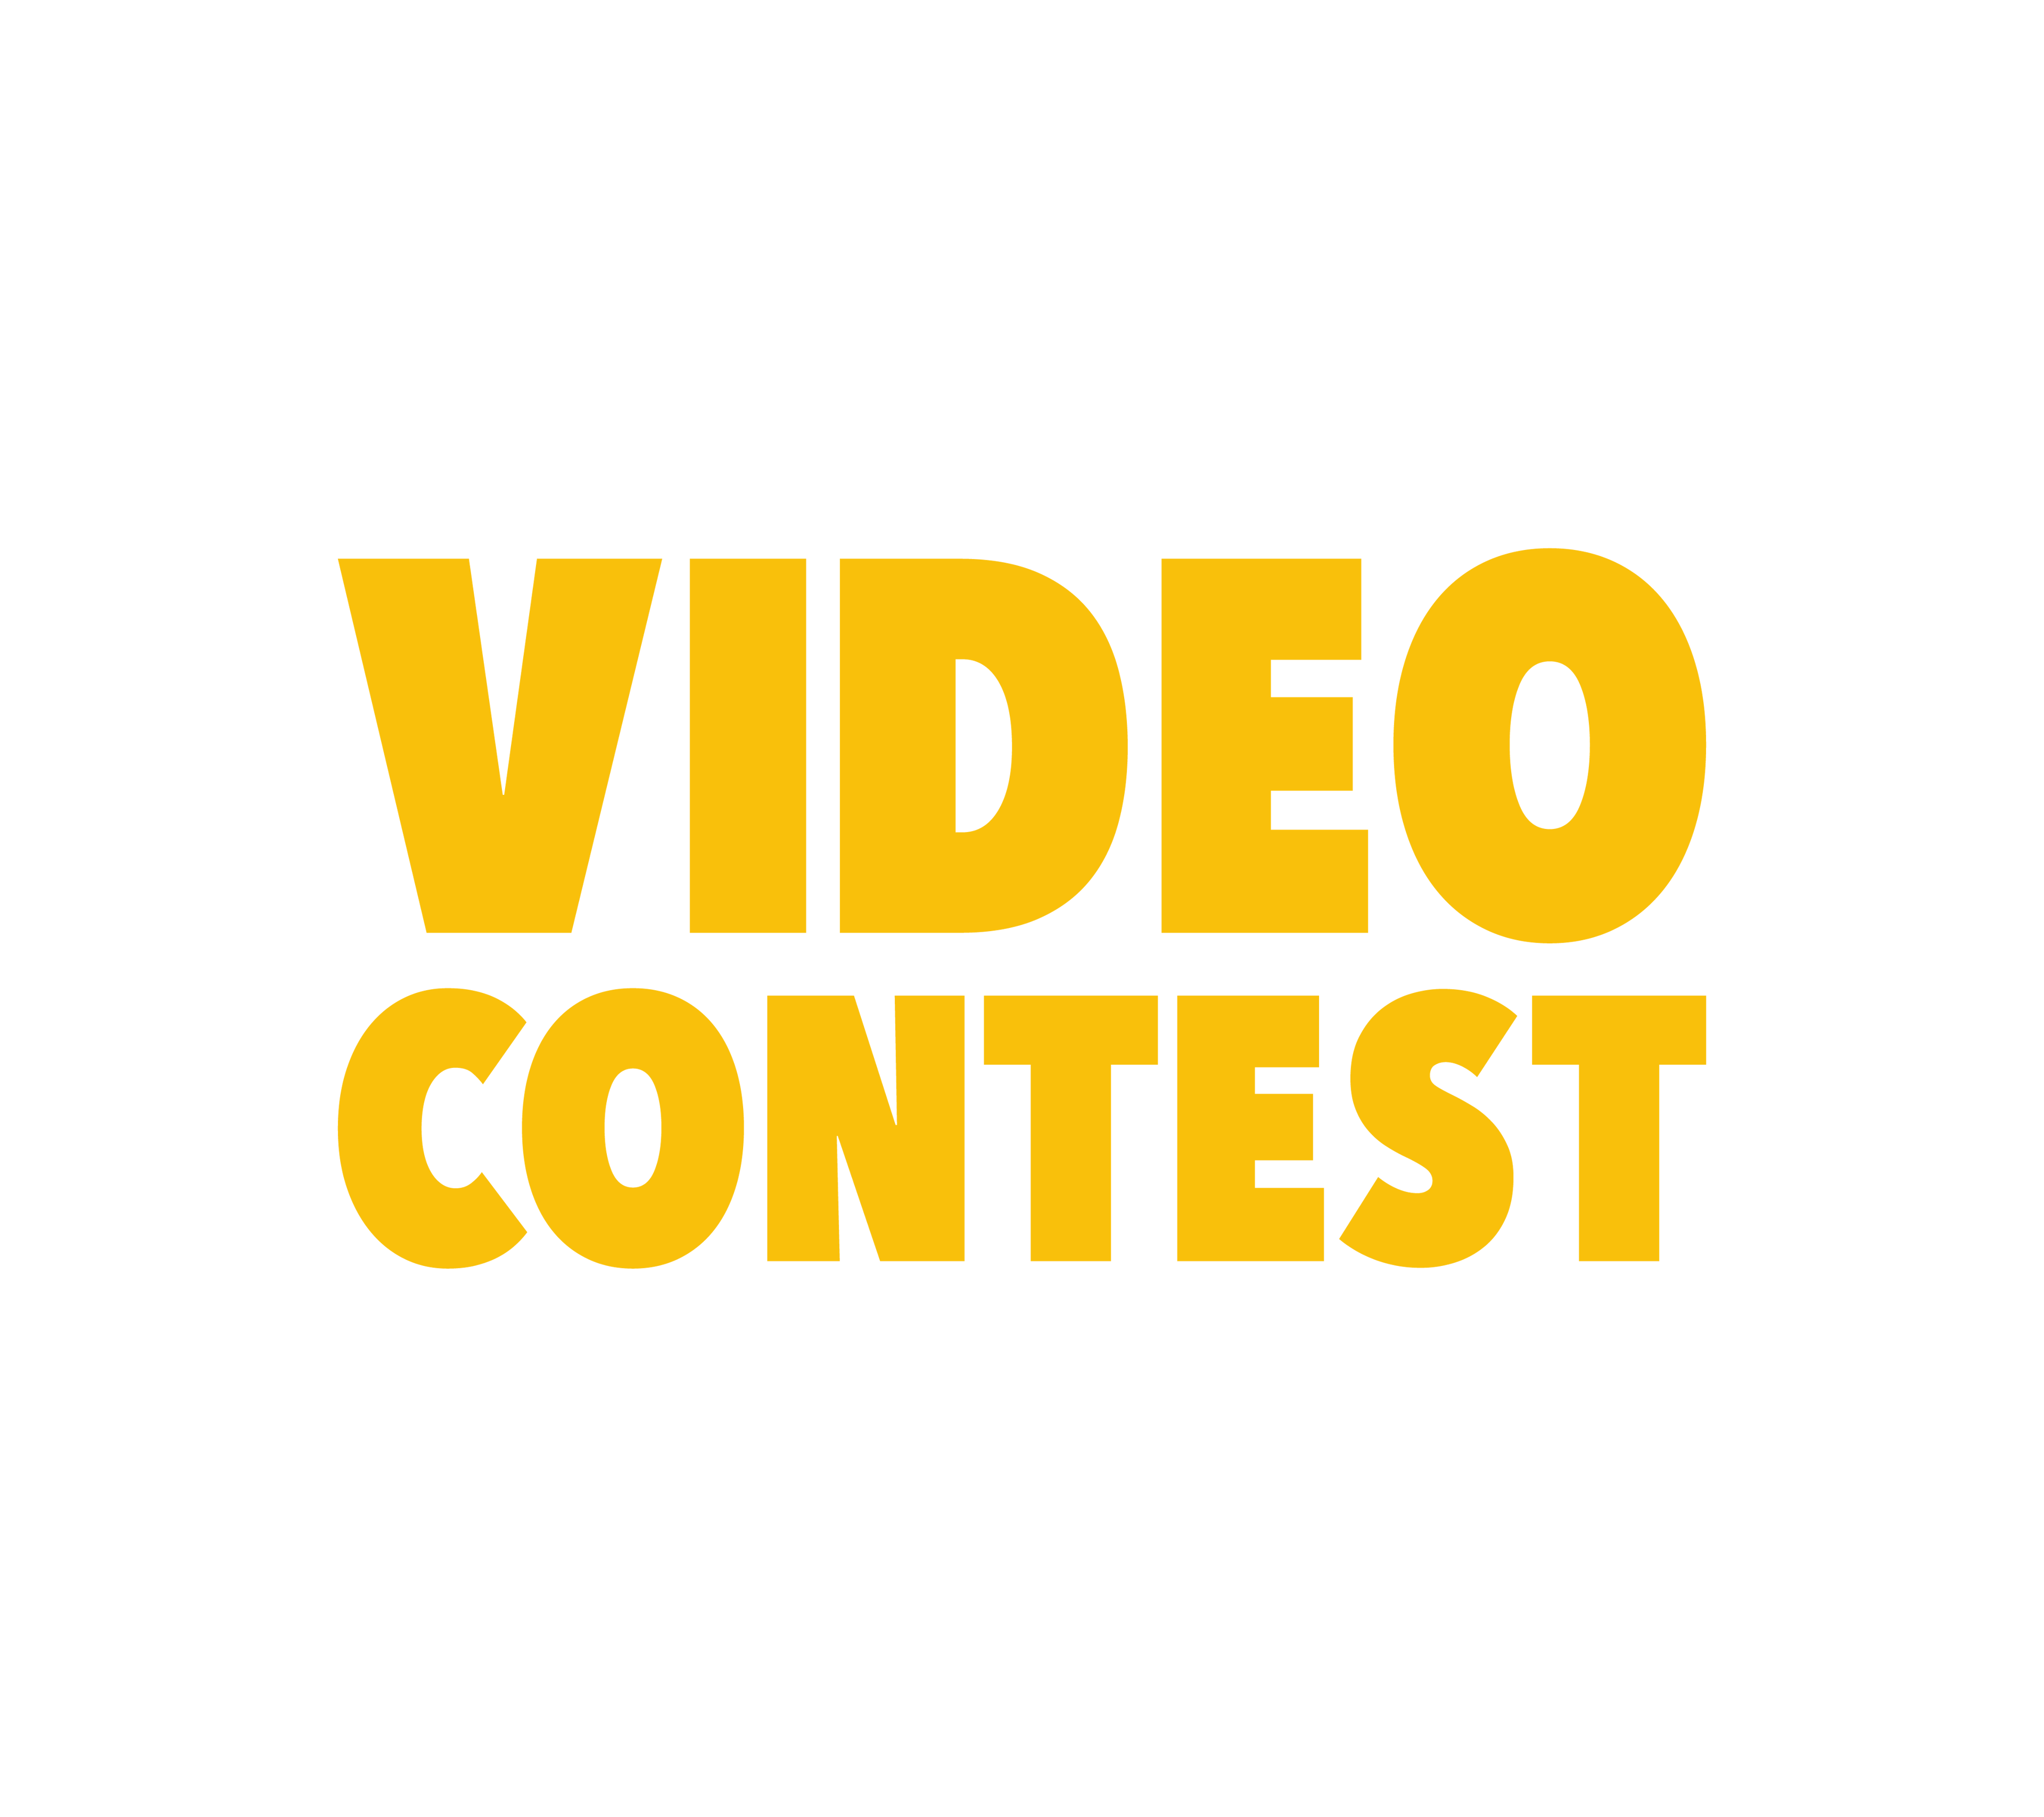 National Youth Remembrance Video Contest